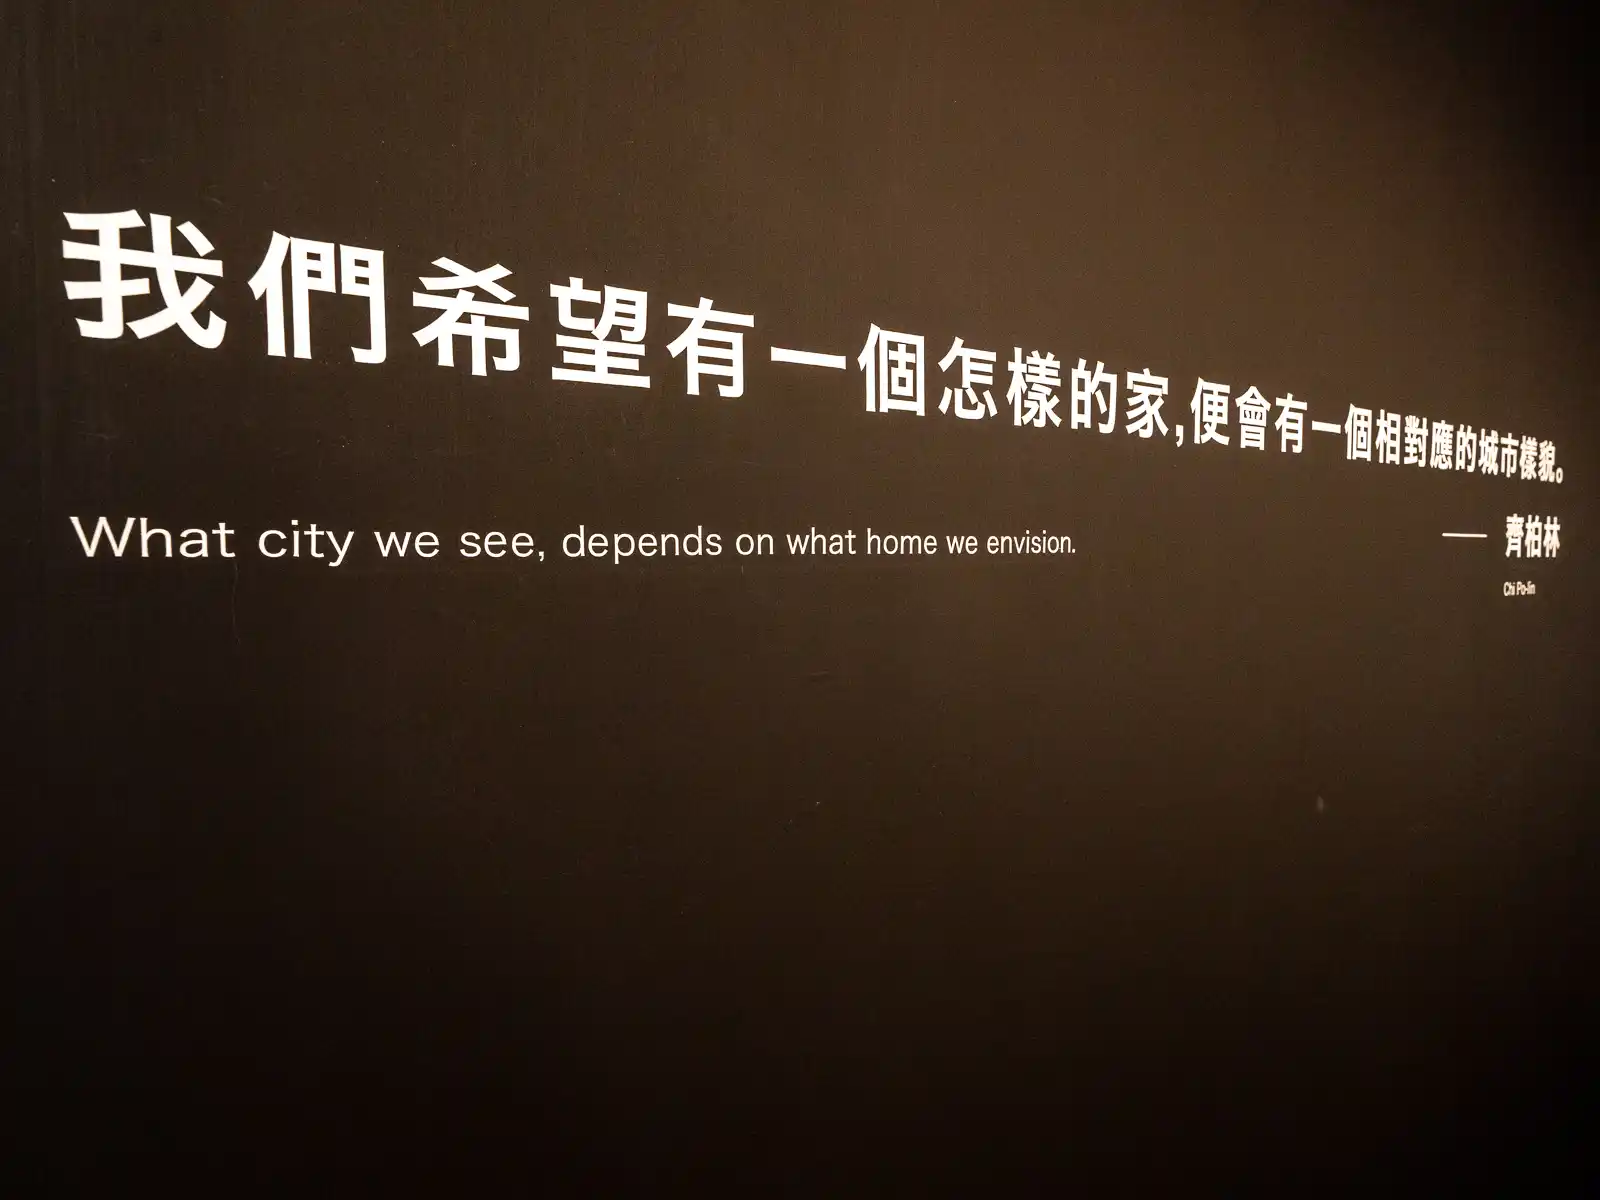 A quote reads: "What city we see, depends on what home we envision".